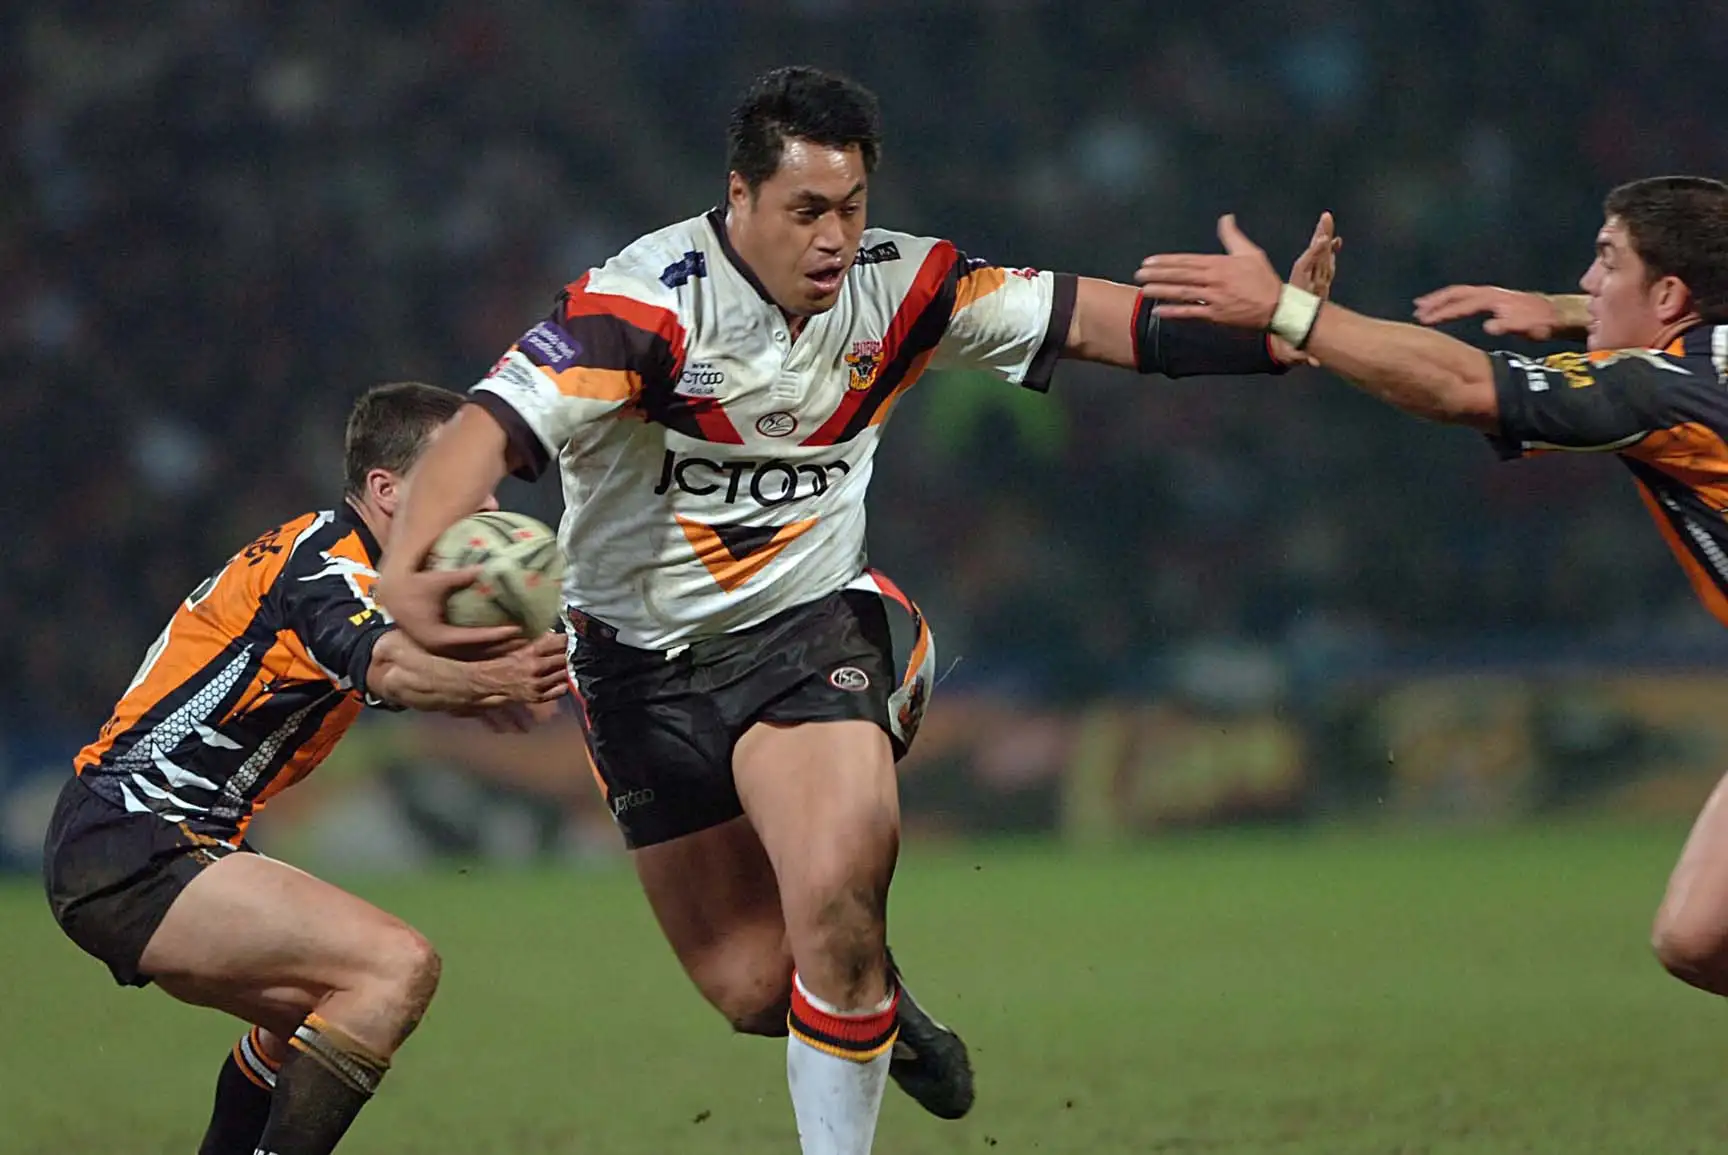 Rugby League Today: Prime Bradford rivals NRL, Watkins’ England hopes & calls to scrap loop games